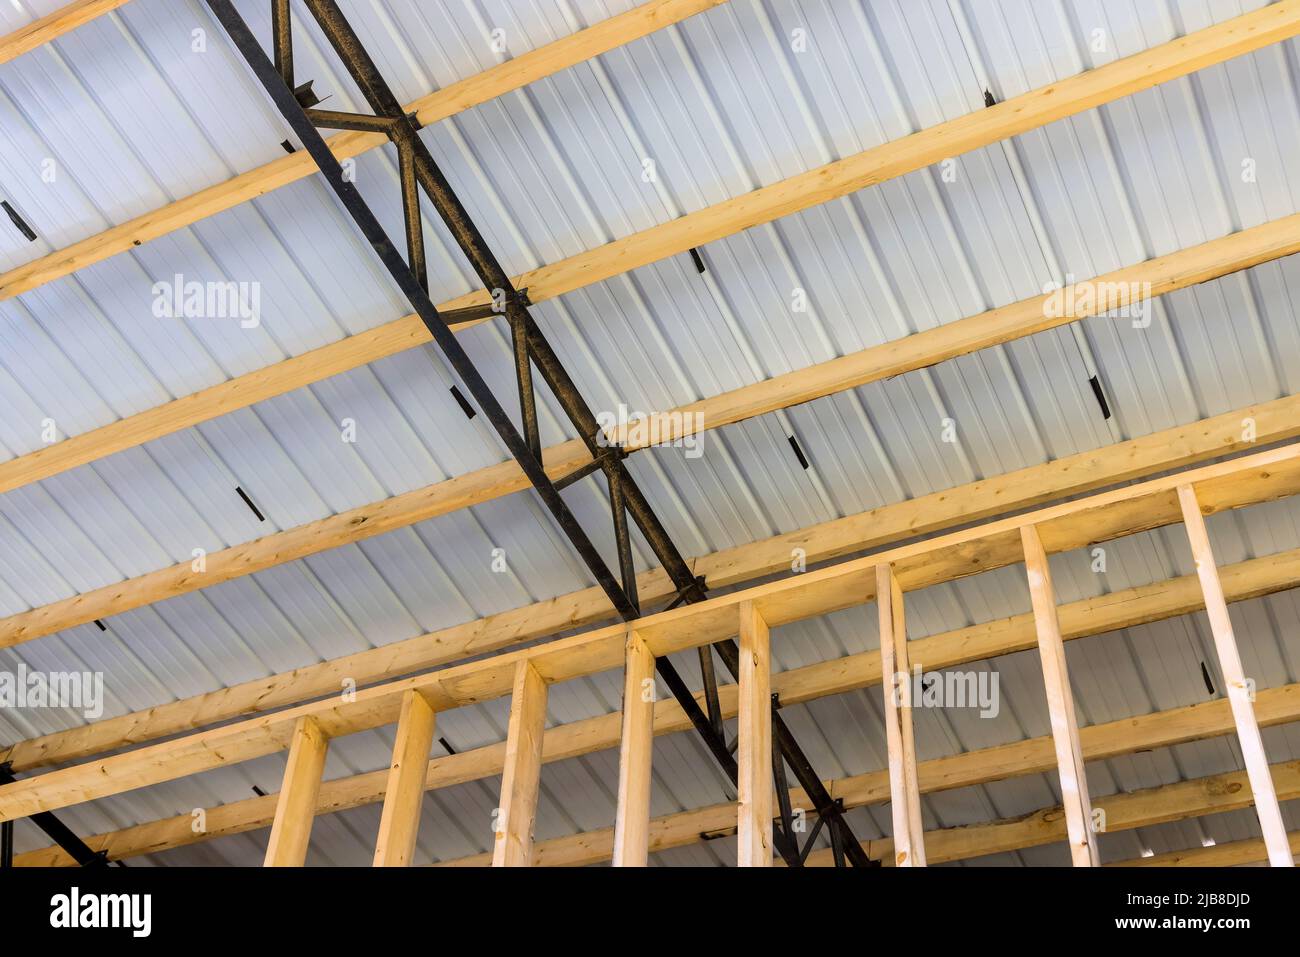 Roofing structure a large hangar consists of steel frame timber joists Stock Photo